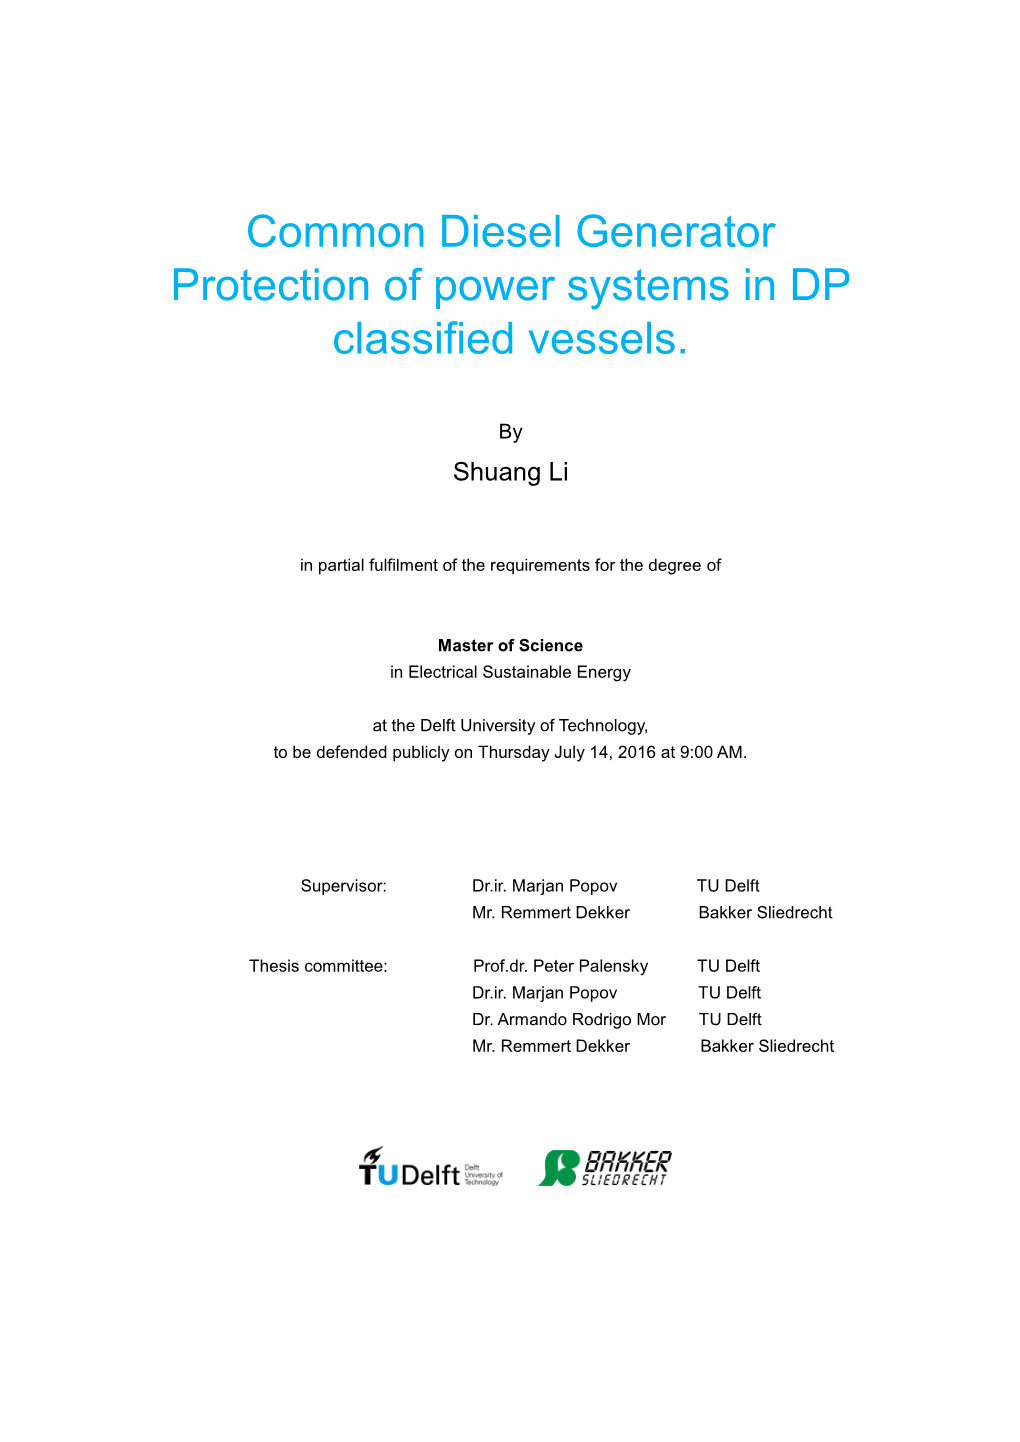 Common Diesel Generator Protection of Power Systems in DP Classified Vessels